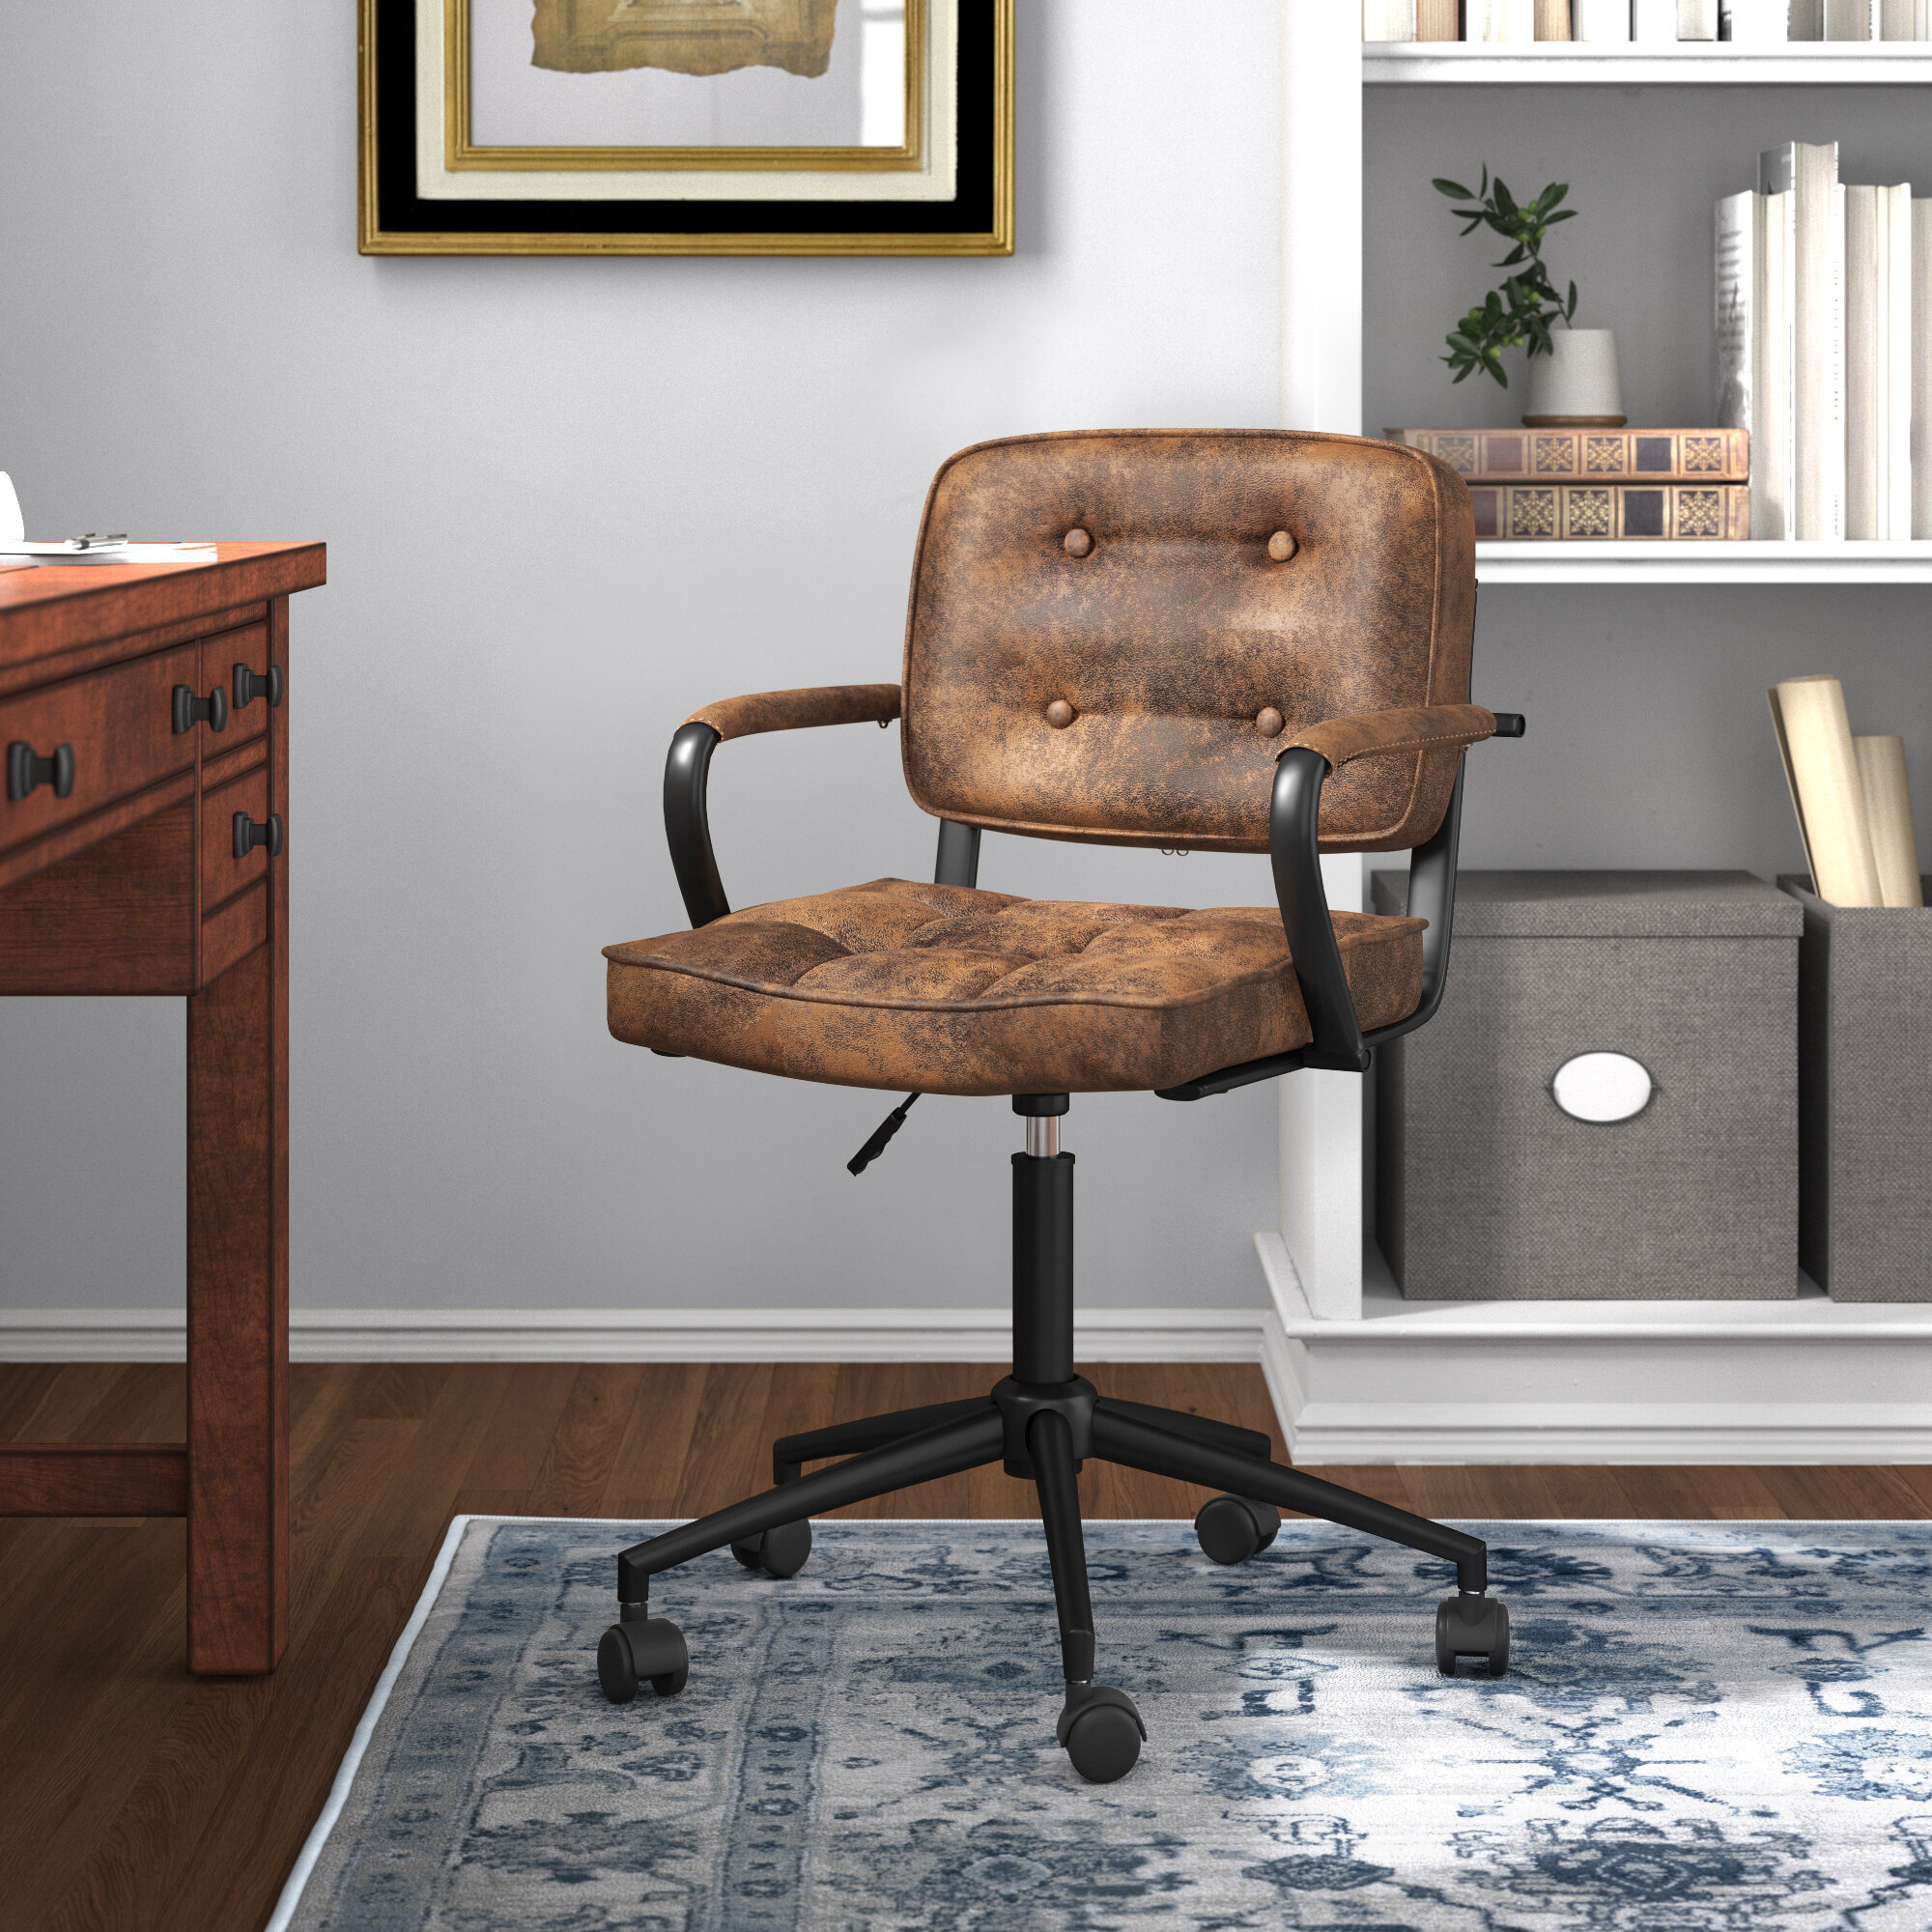 Albaugh Executive Chair Williston Forge Upholstery Color Dark Brown